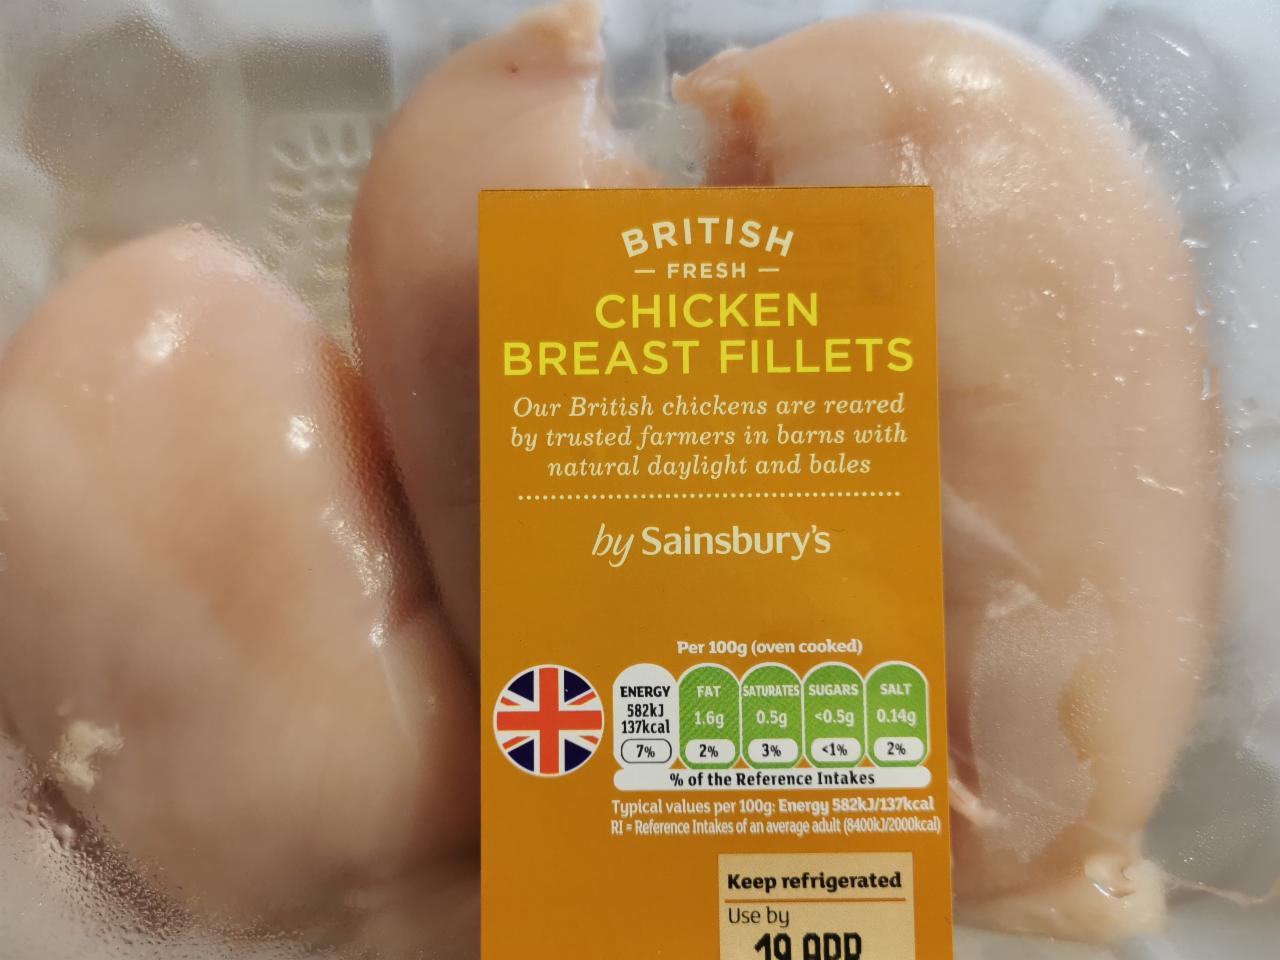 Photo - Chicken breast fillets by Sainsbury's